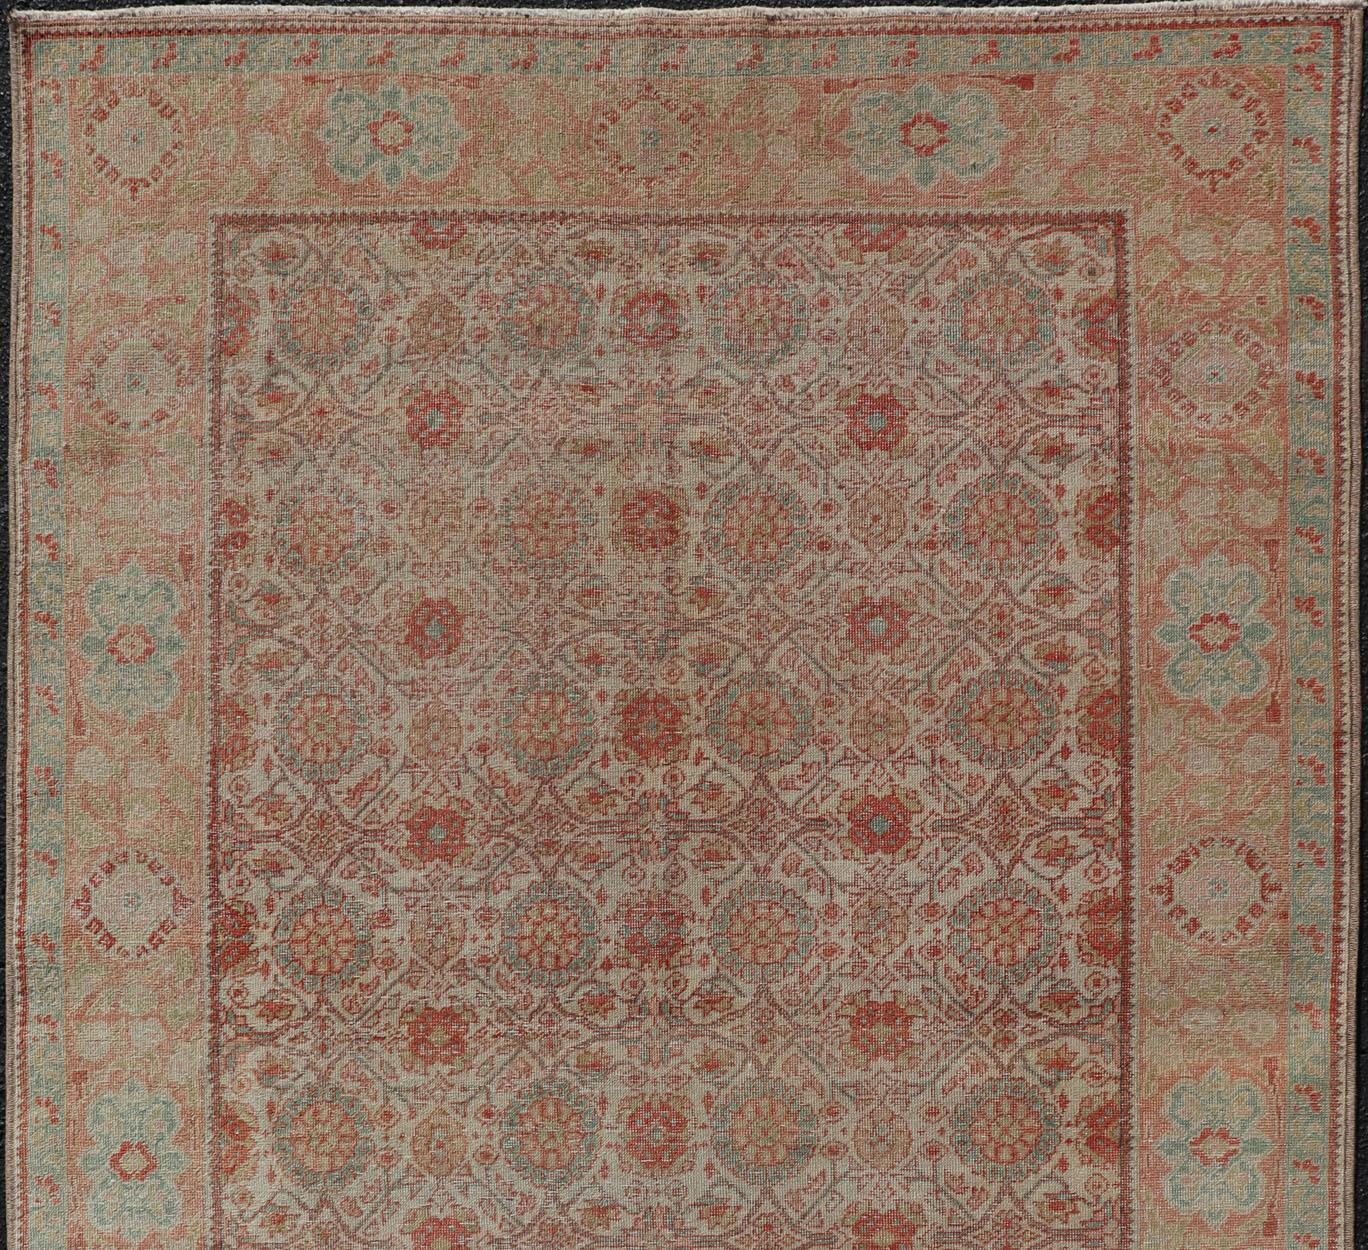 Antique Persian Tabriz rug with all-over floral design in light blue/ light green, salmon, coral, red-coral, and cream rug SUS-2012-697, country of origin / type: Iran / Tabriz, circa 1920

This antique Persian Tabriz carpet features a refined